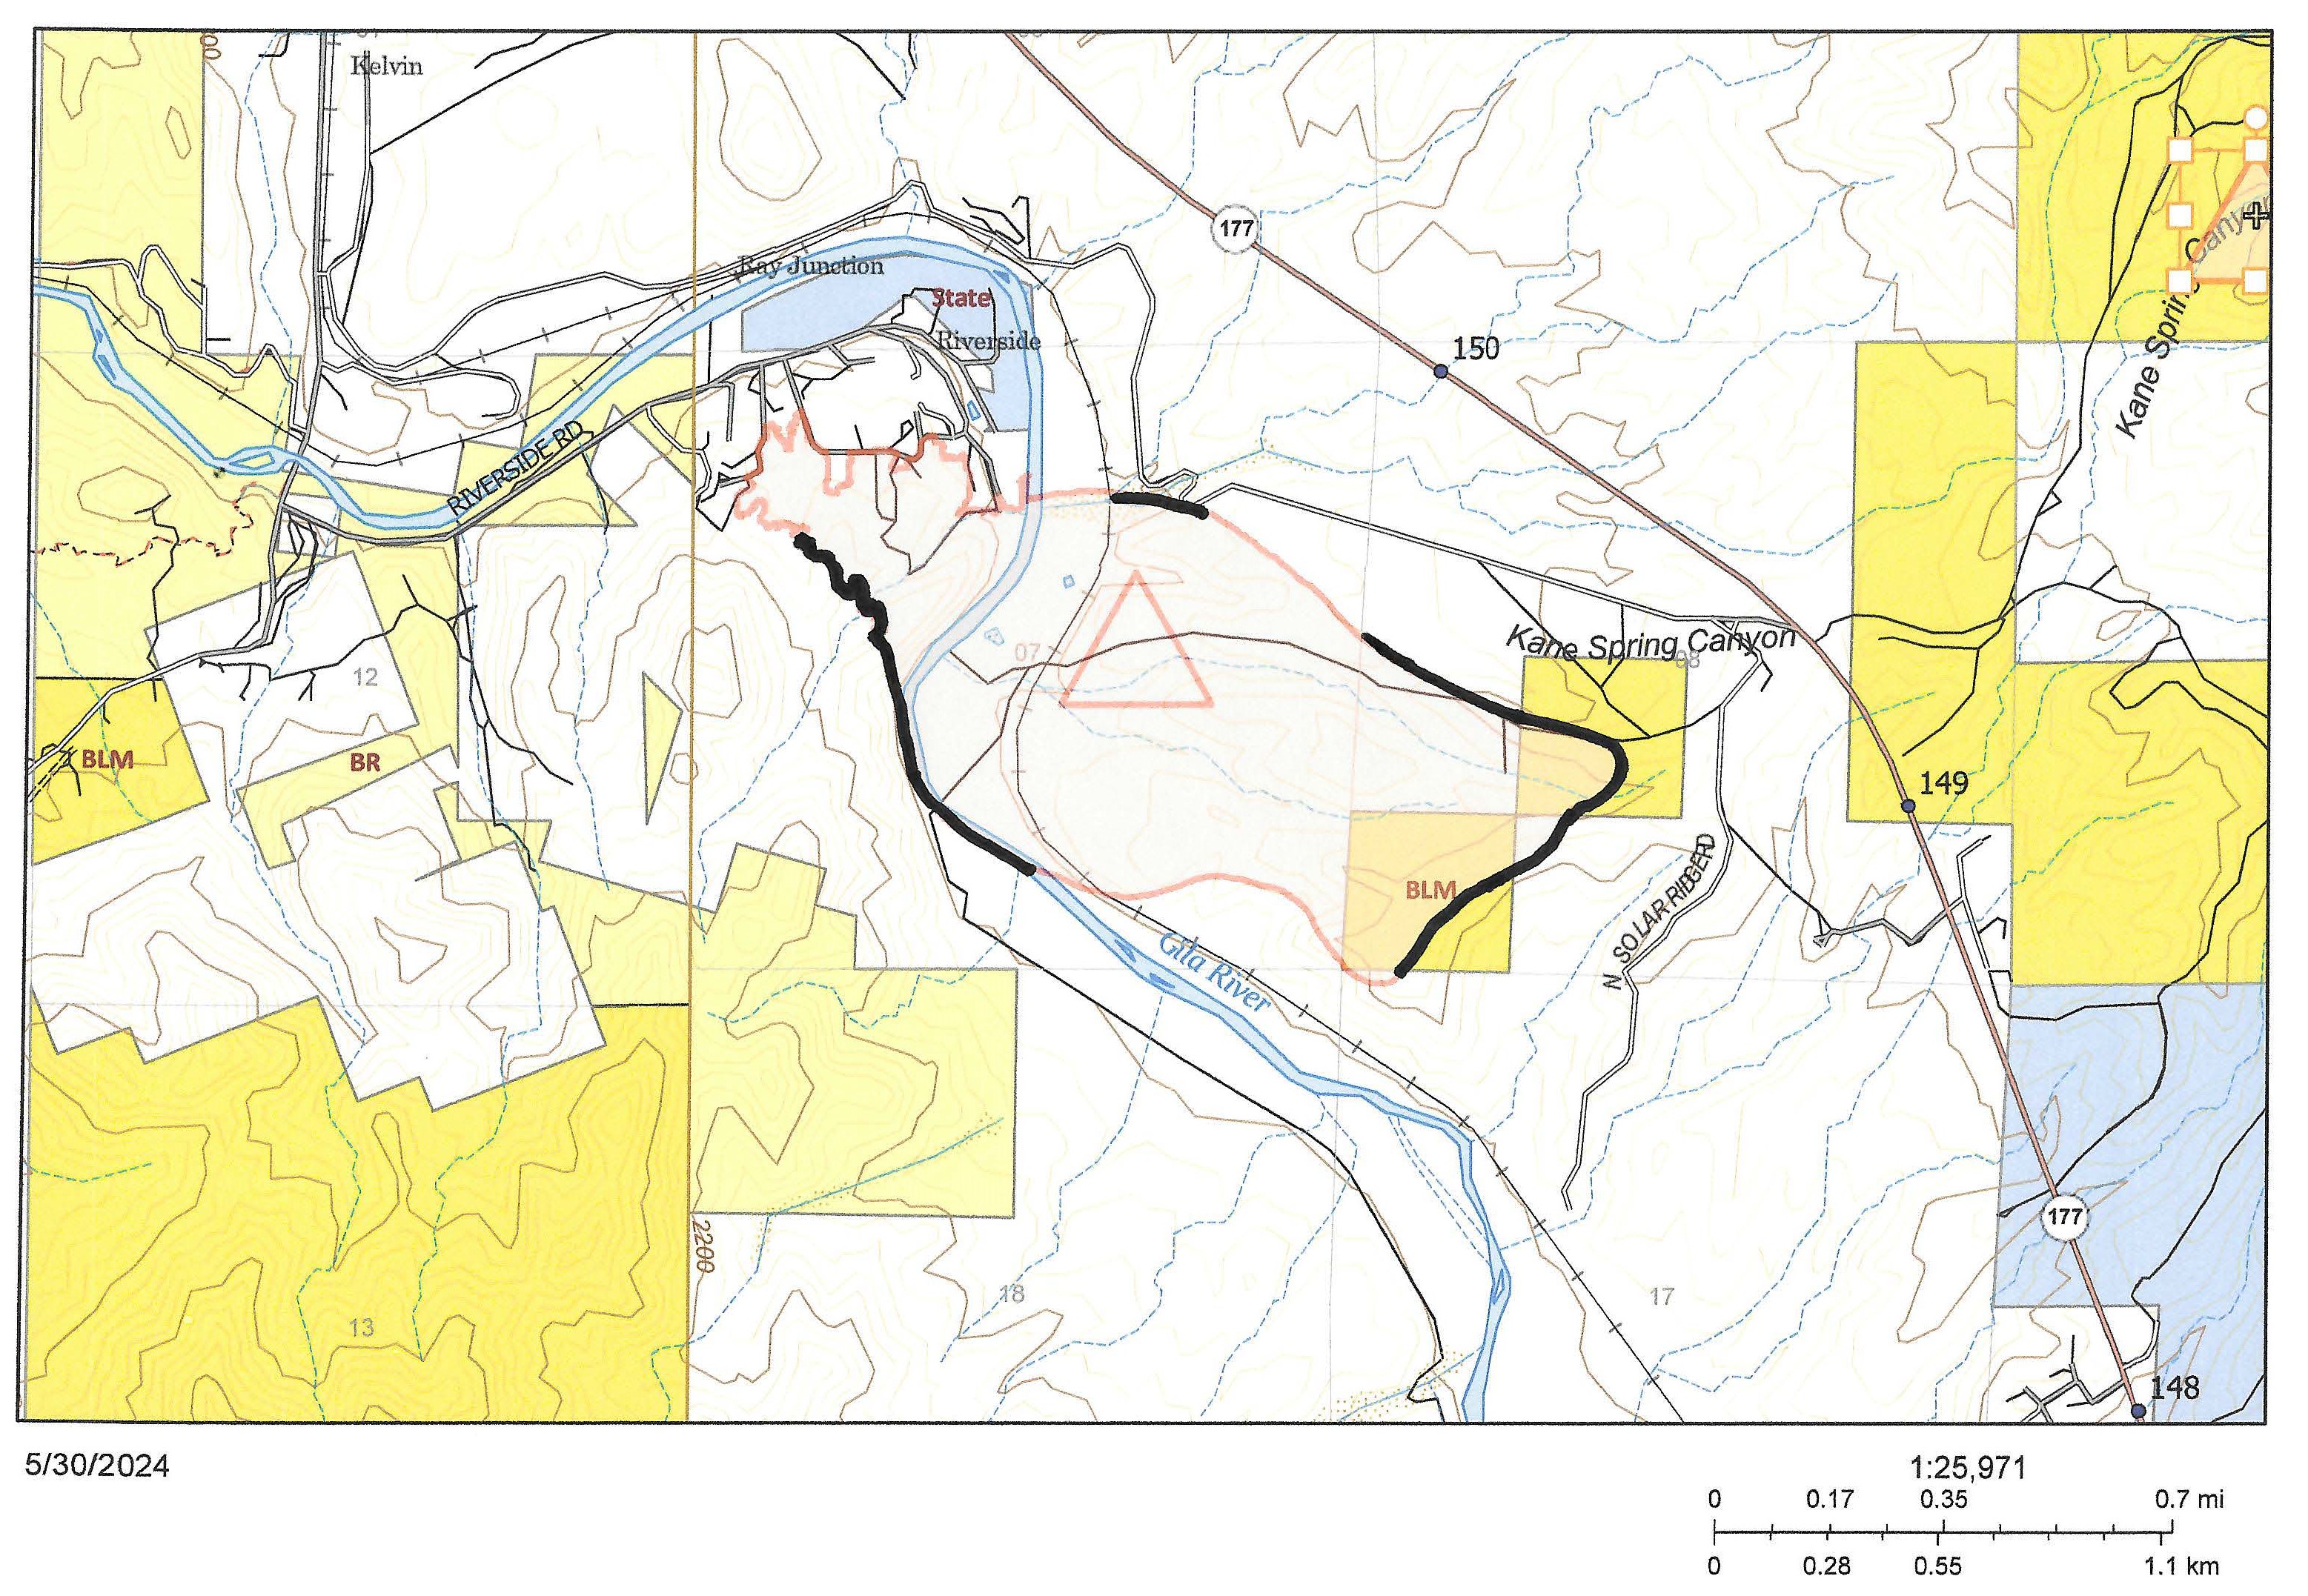 This is a map of the Simmons Fire on May 31 2024